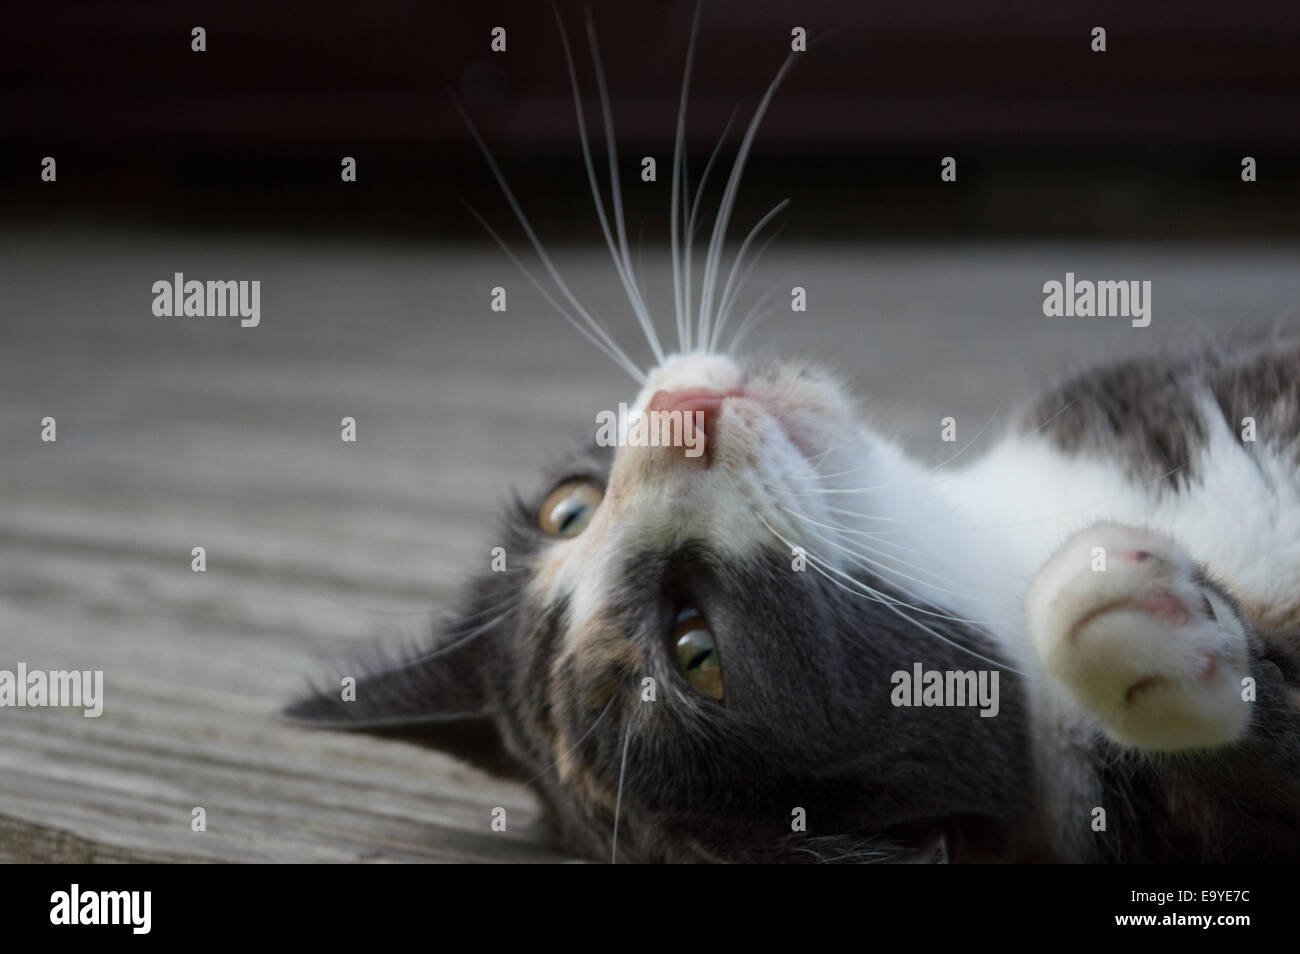 Cute cat - I'm So Pretty, the cat's whiskers Stock Photo